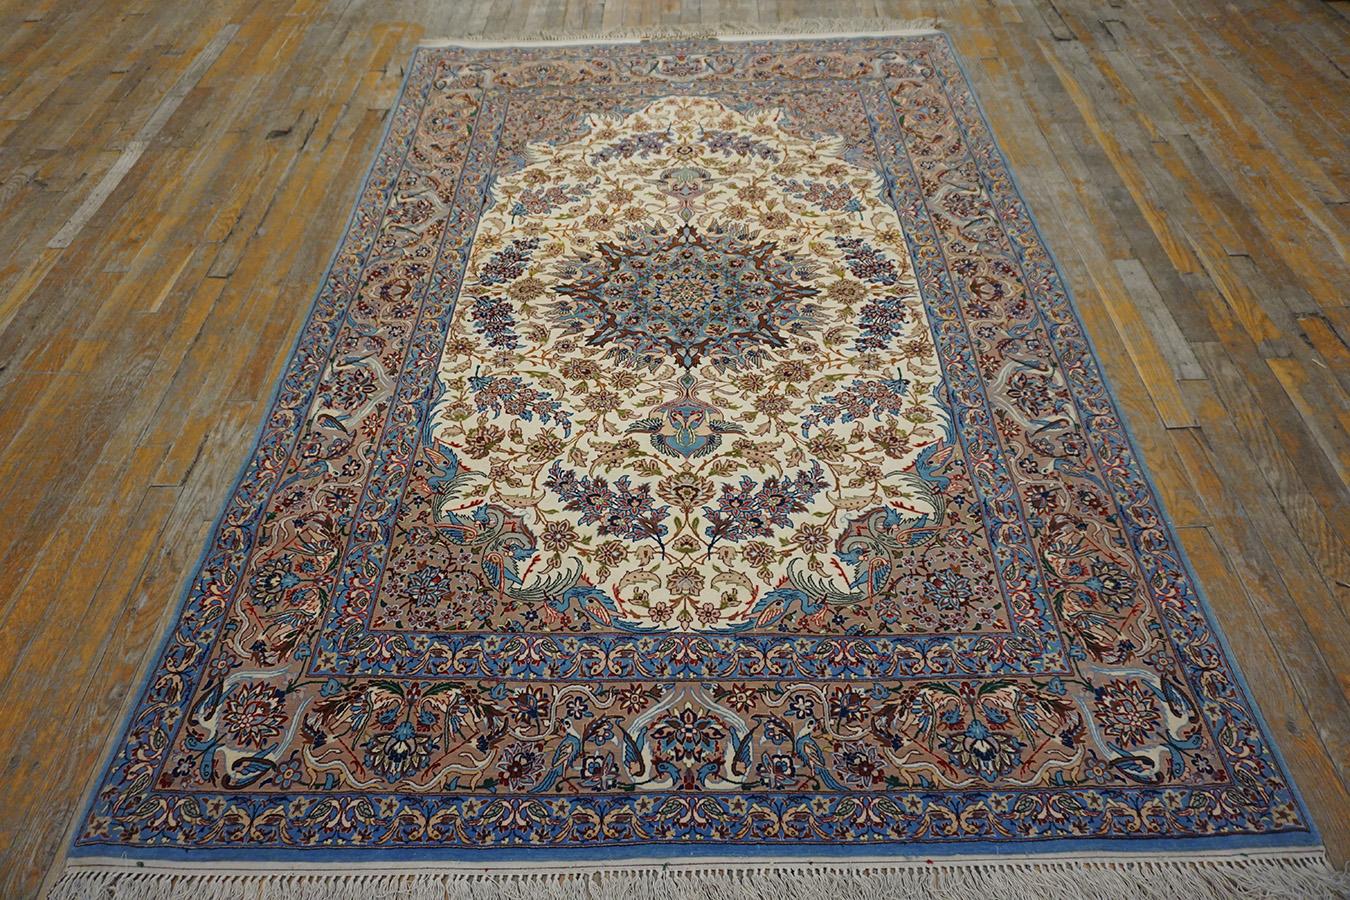 Mid 20th Century Persian Isfahan Carpet Signed by Zolfaghari 
( 4'11